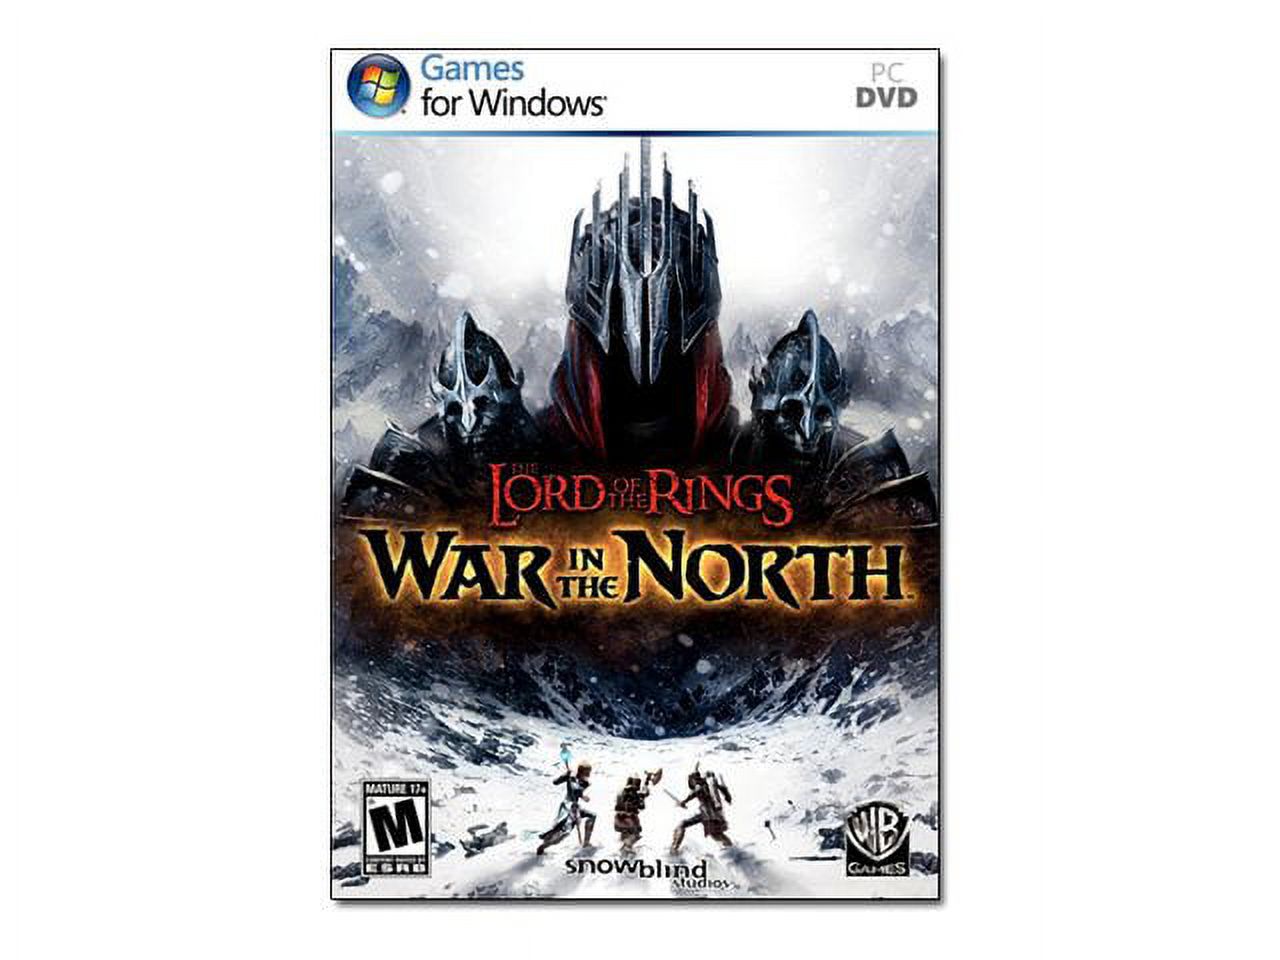 The Lord of the Rings War In the North - Win - DVD - image 2 of 4